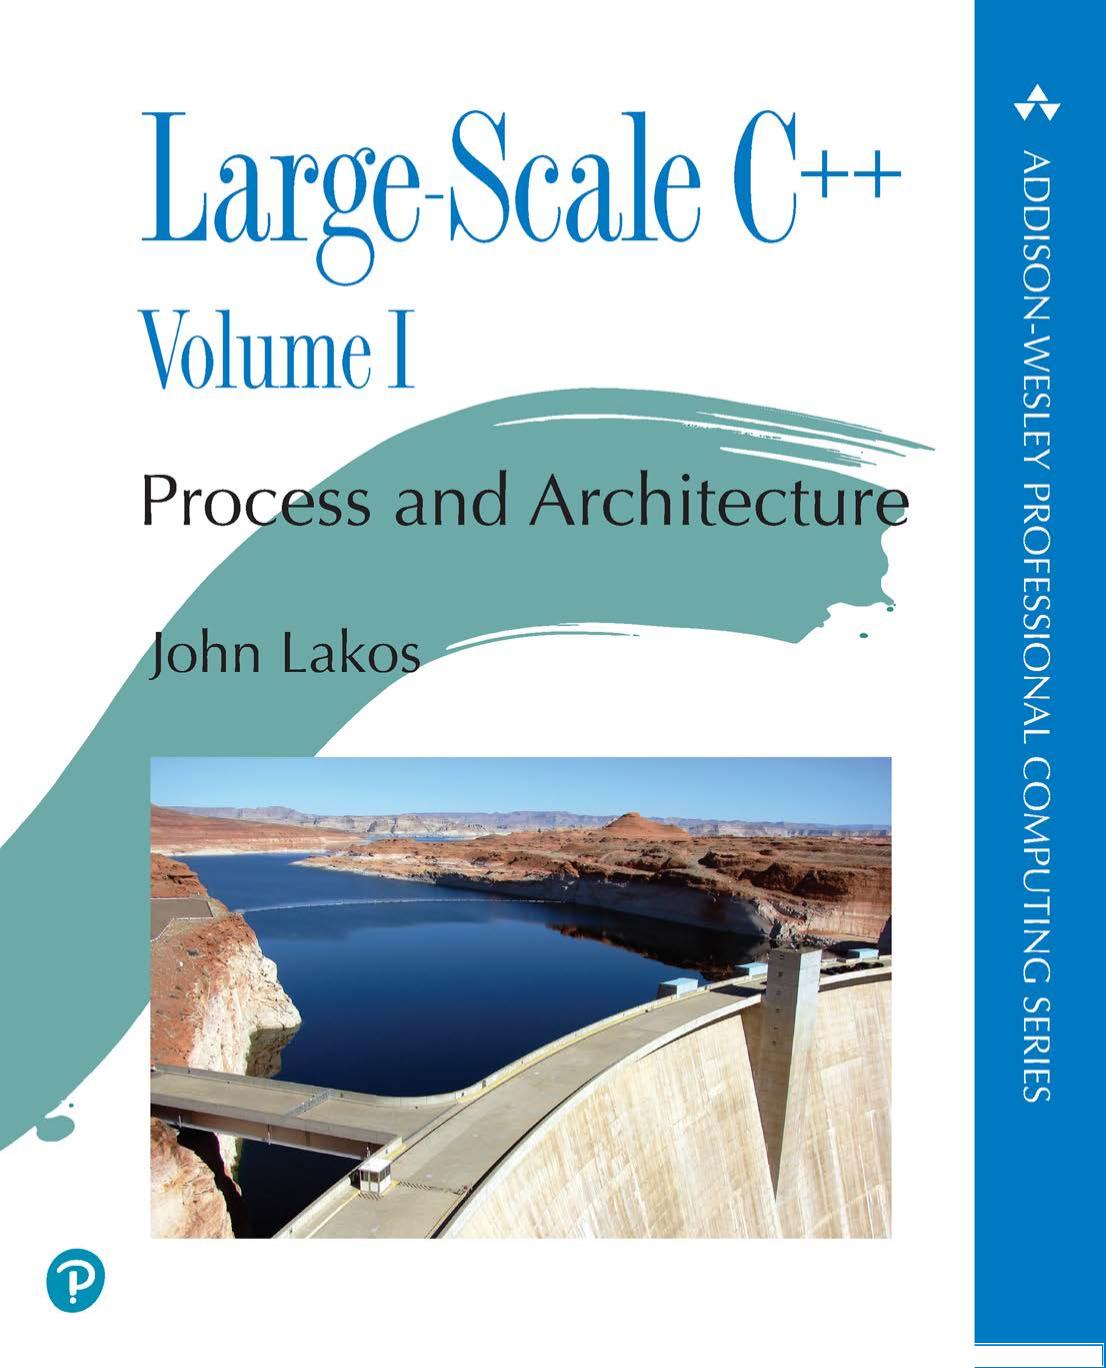 Large-Scale C++: Process and Architecture, Volume 1